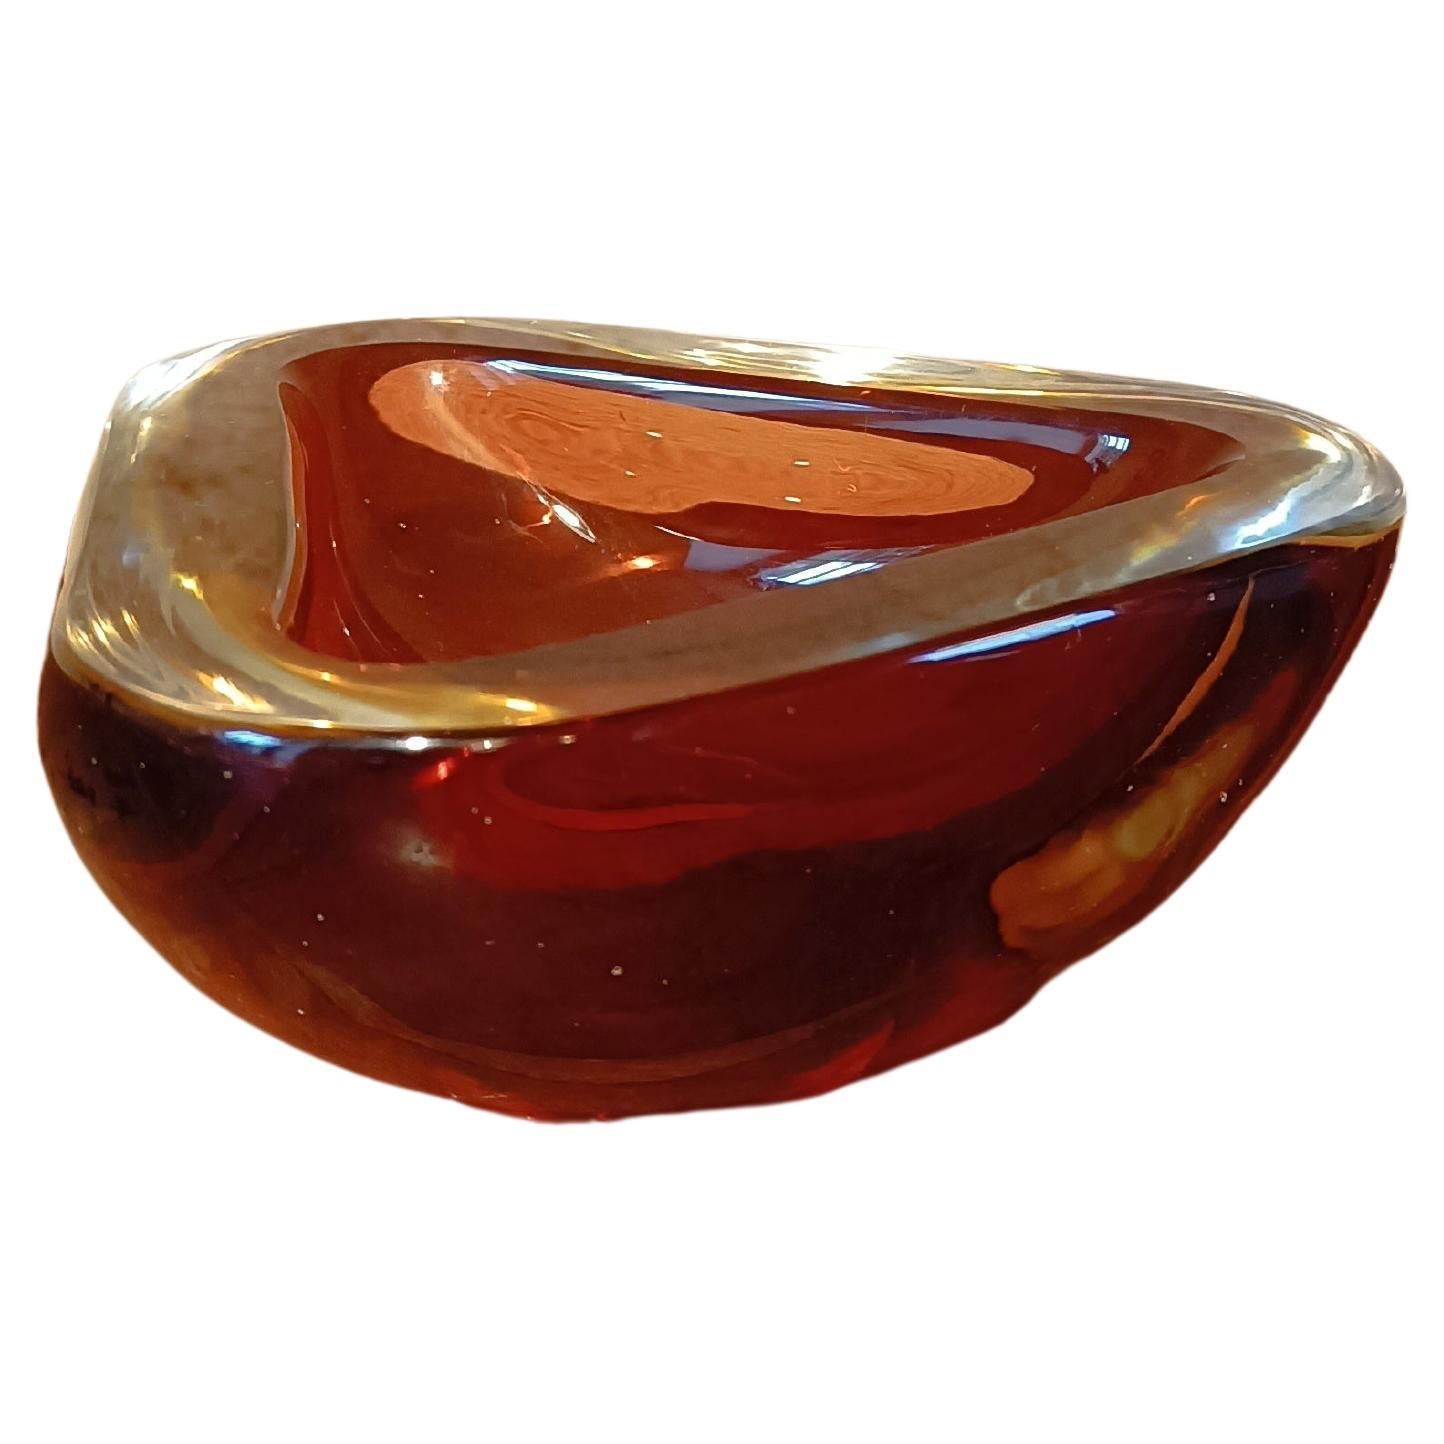 Mid-Century sommerso Murano Glass Ashtray or Bowl, italian design, 1970

This is a beautiful triangular shaped Murano art glass ashtray or decorative bowl. . It is made according to the technique of sommerso which allows to superimpose several